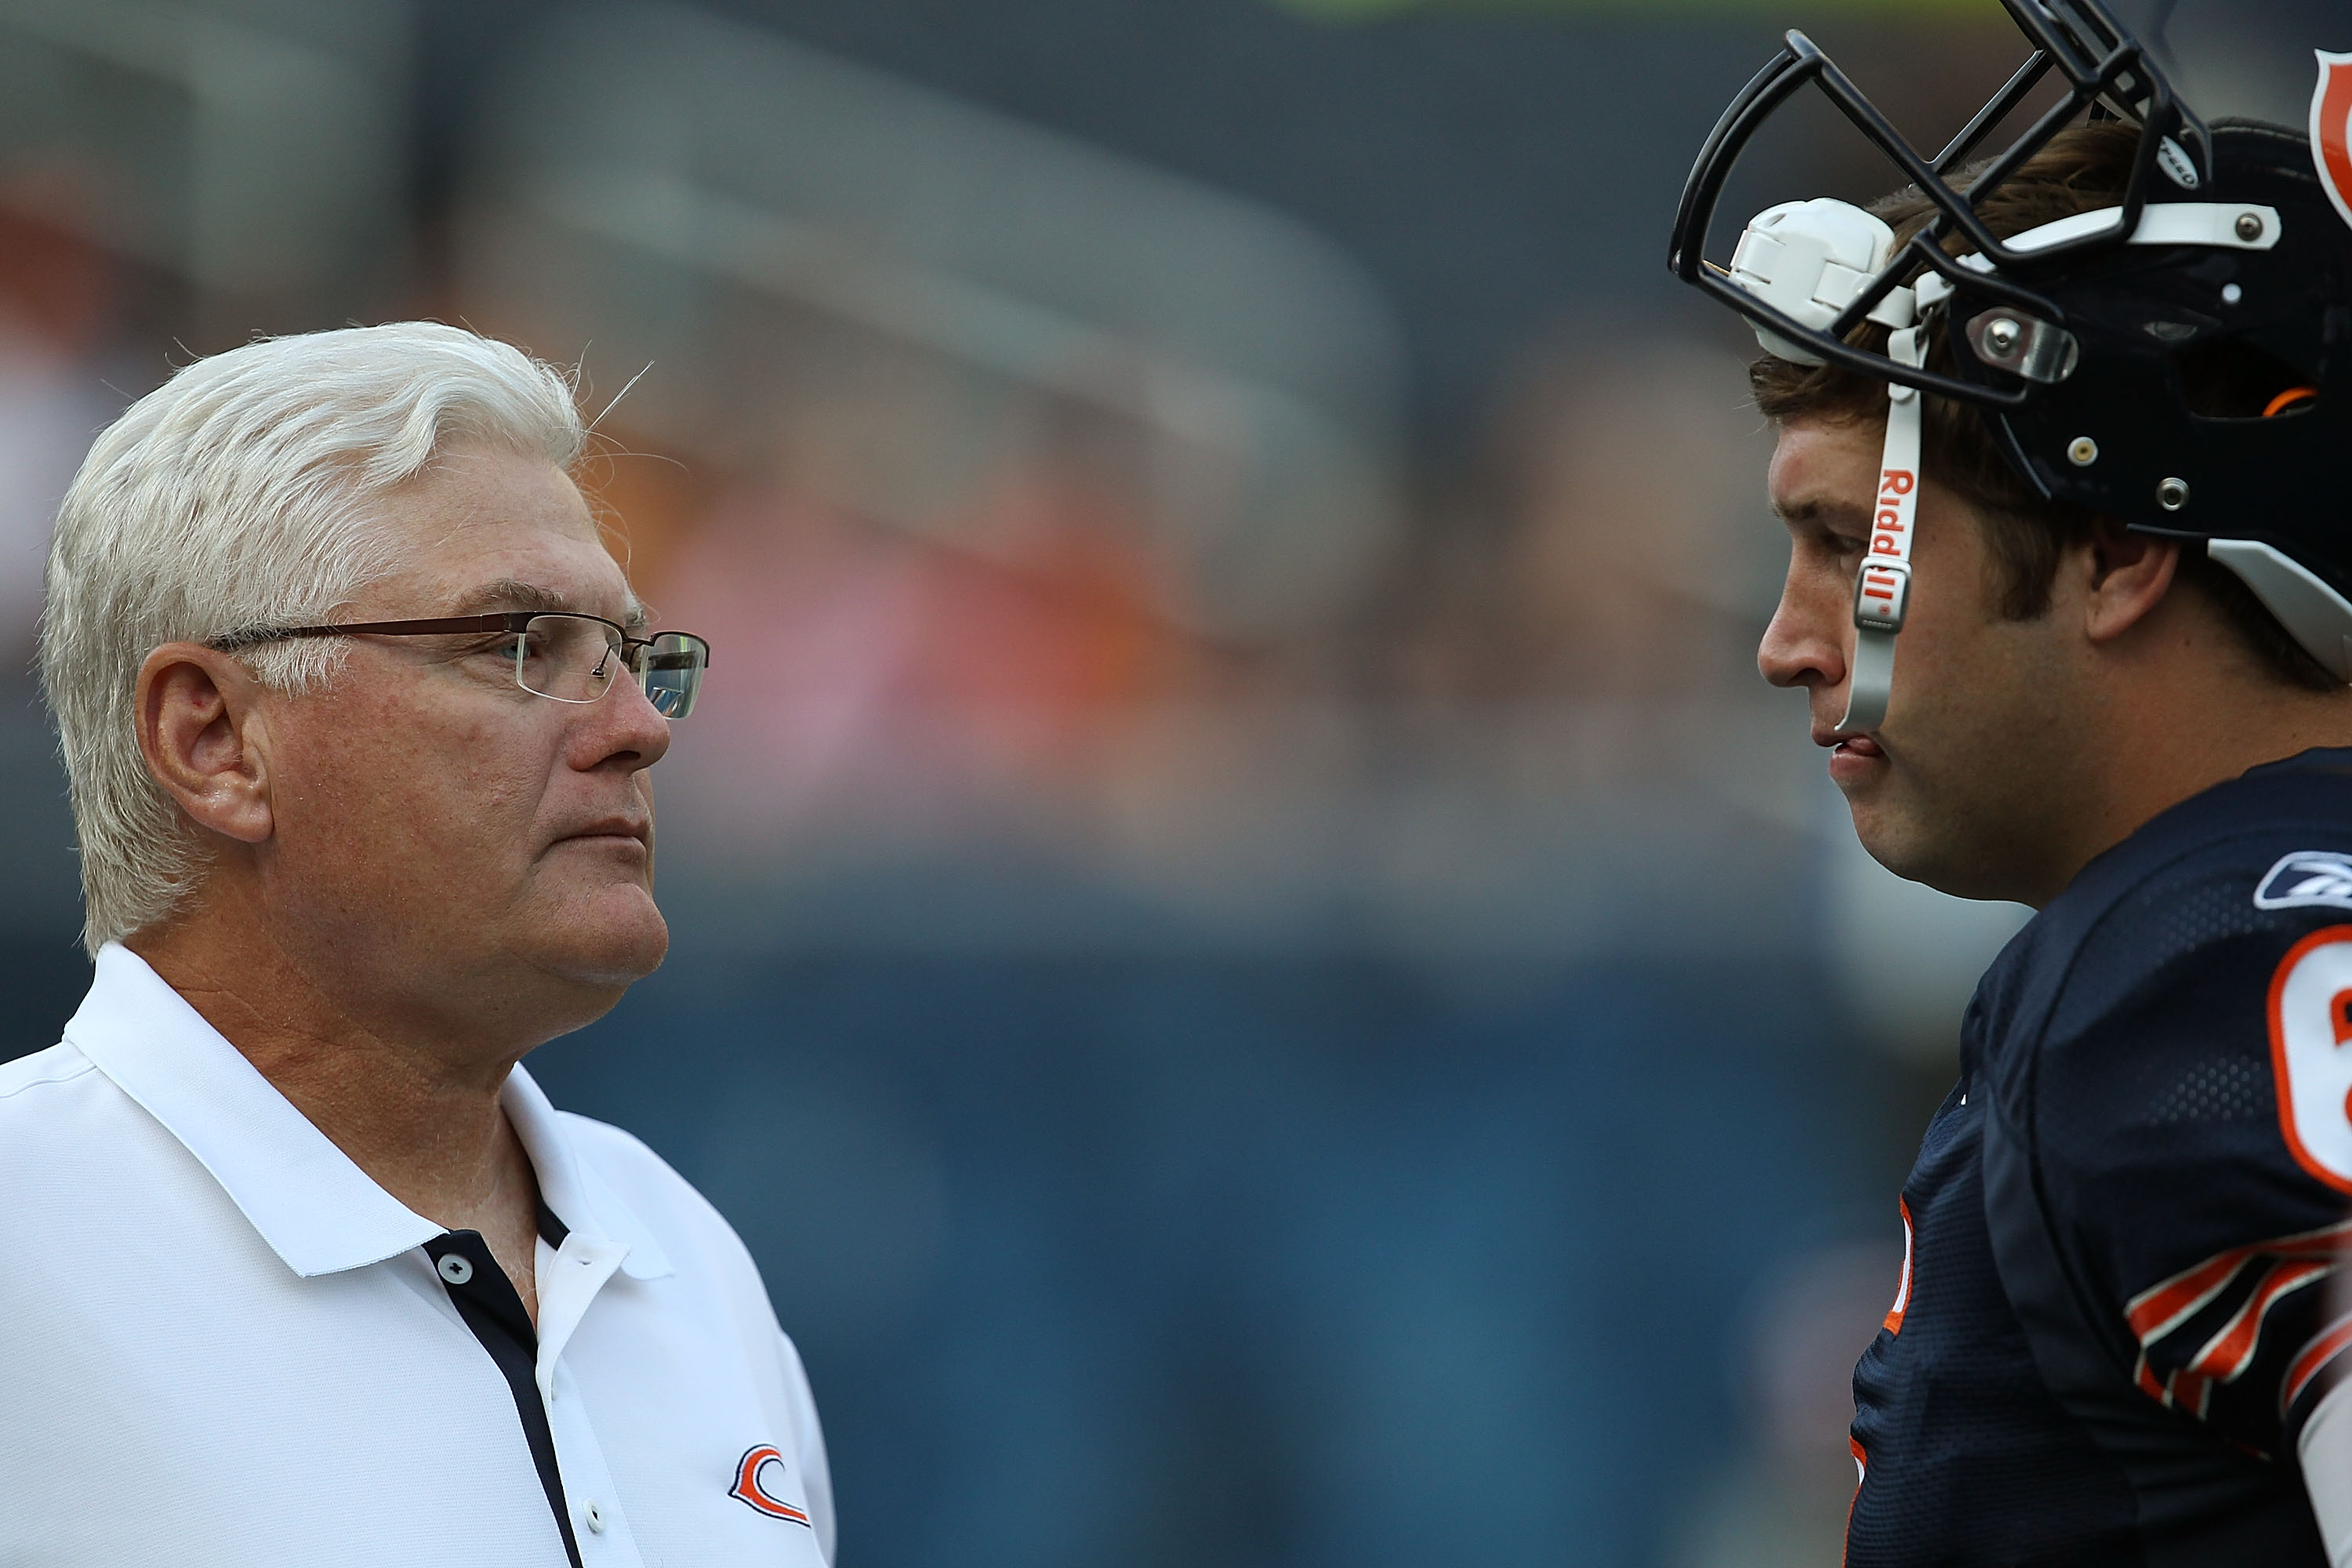 CHICAGO - AUGUST 21: Offensive coordinator Mike Martz of the Chicago Bears talks with Jay Cutler #6 during warm-ups before a preseason game against the Oakland Raiders at Soldier Field on August 21, 2010 in Chicago, Illinois. (Photo by Jonathan Daniel/Get